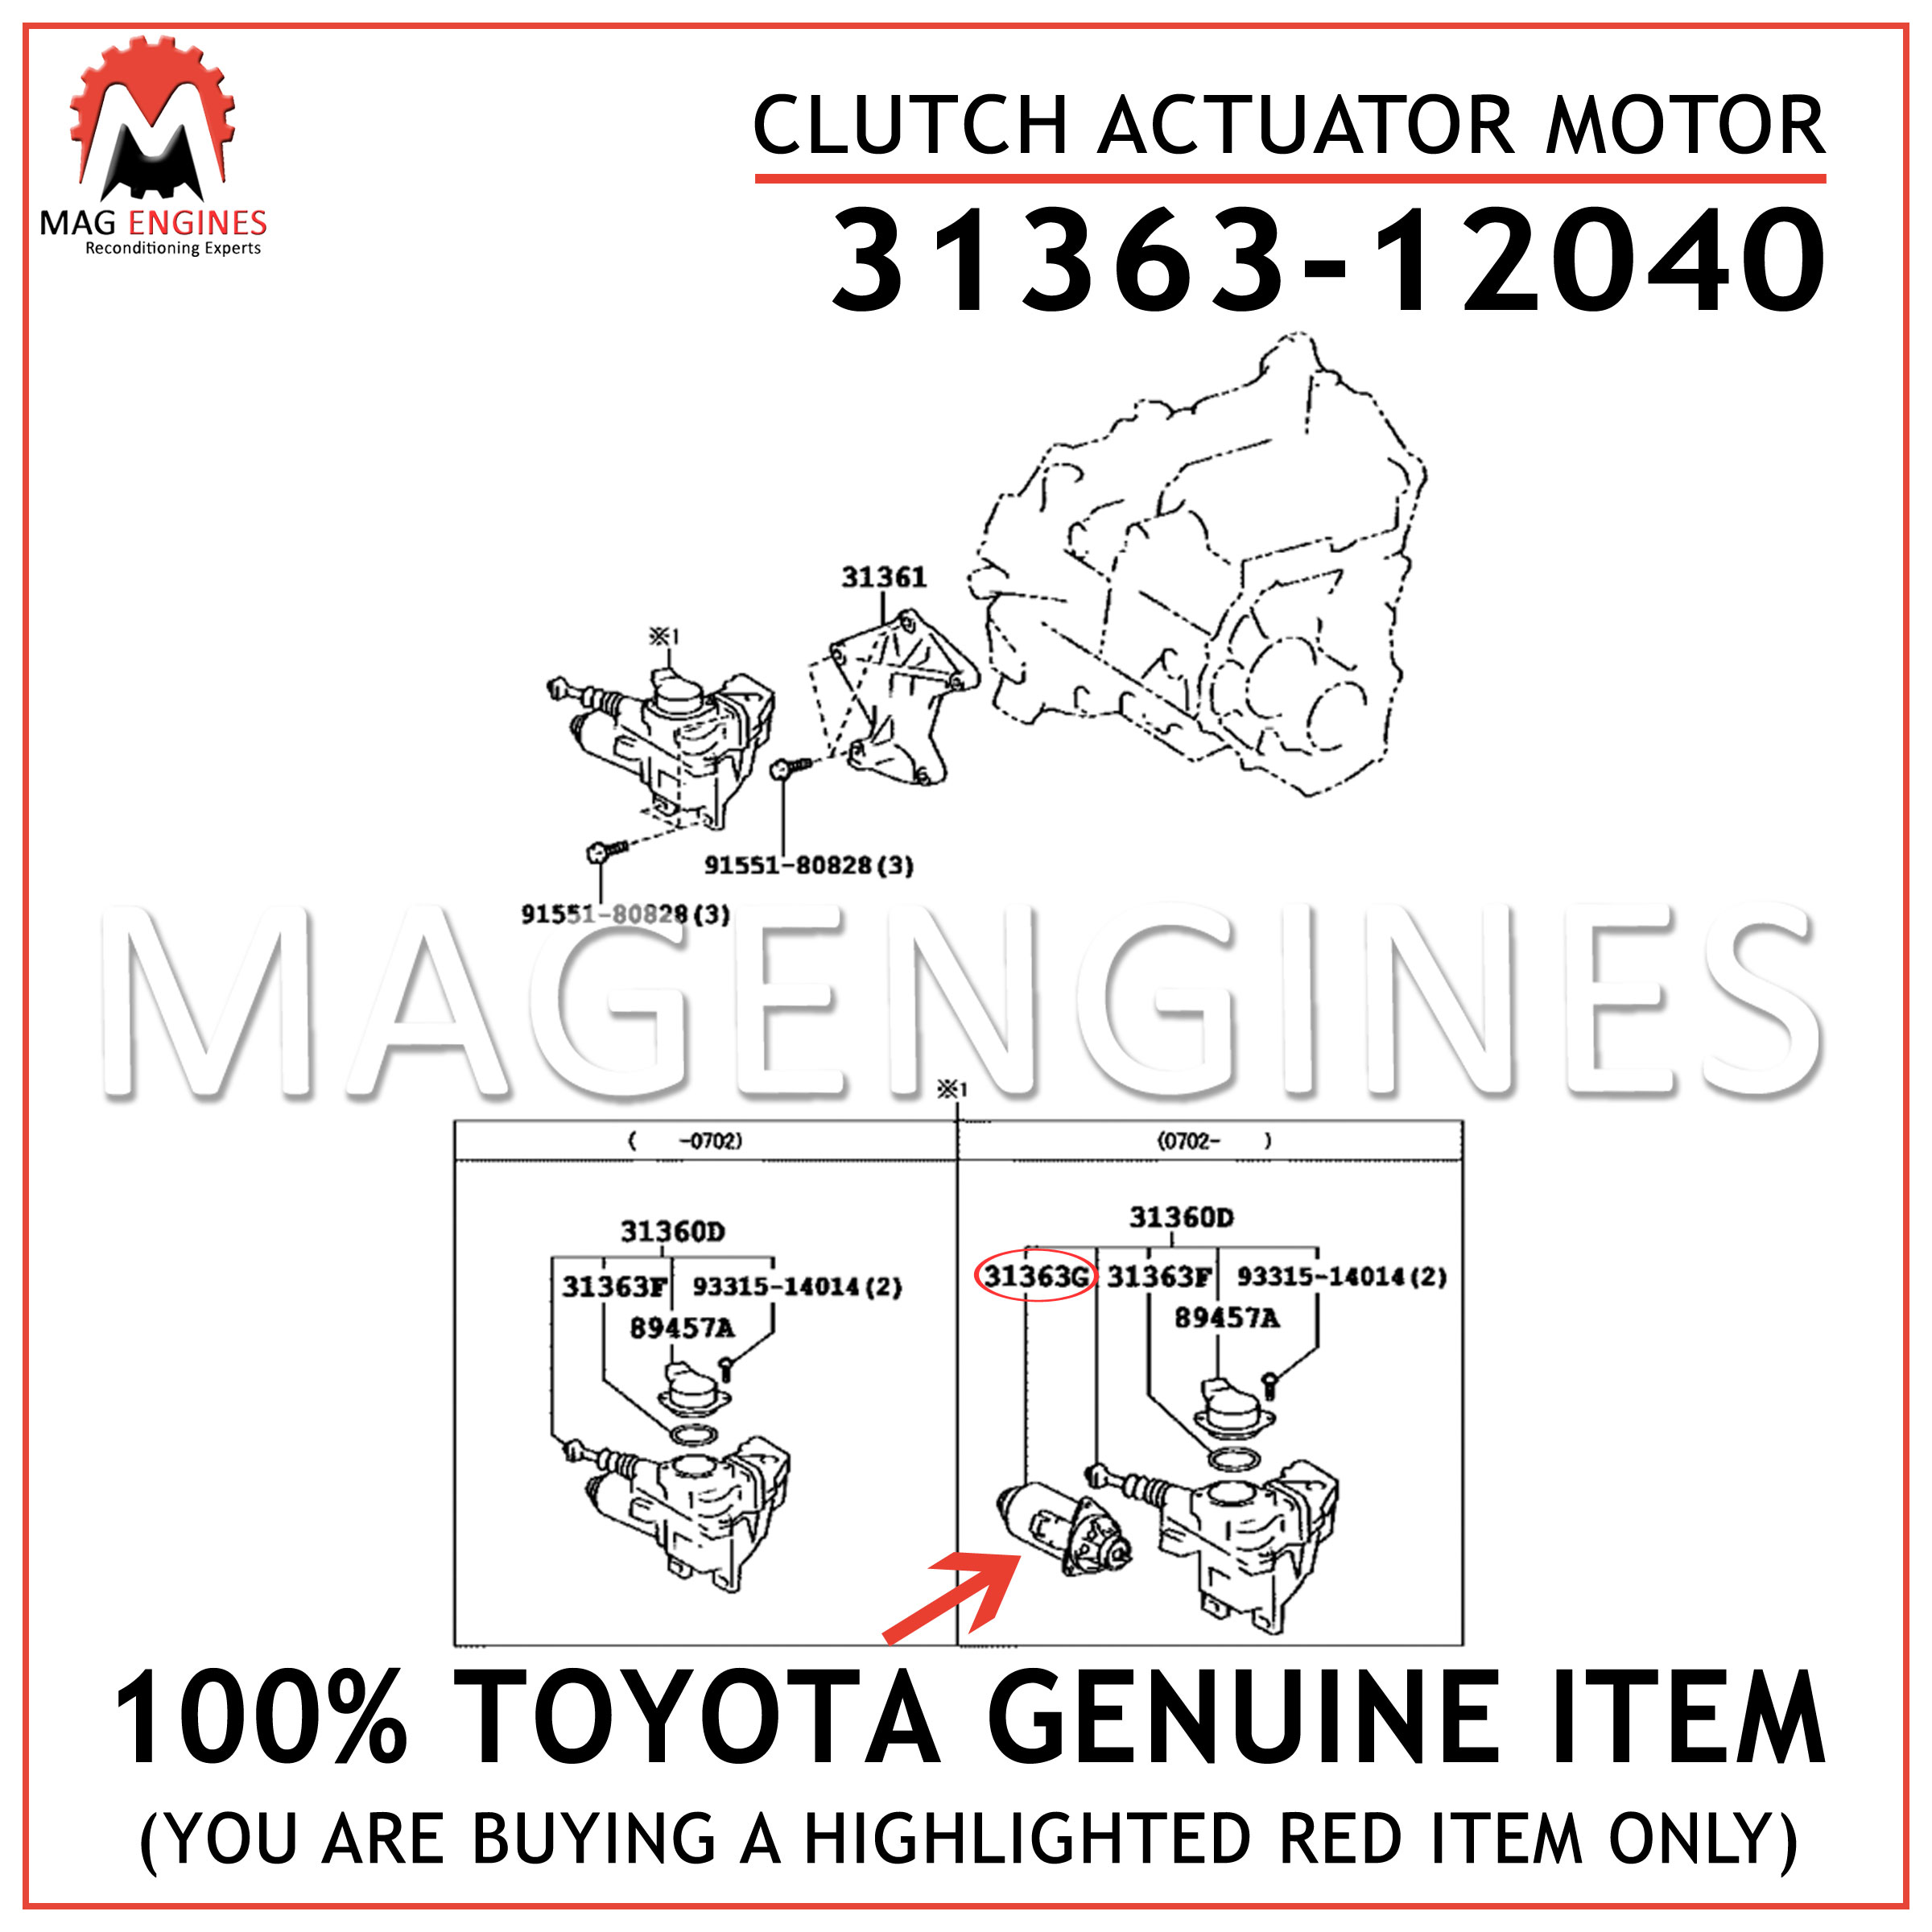 Ting Ting TTRS store Modification Clutch Motor Kit 31363-12040